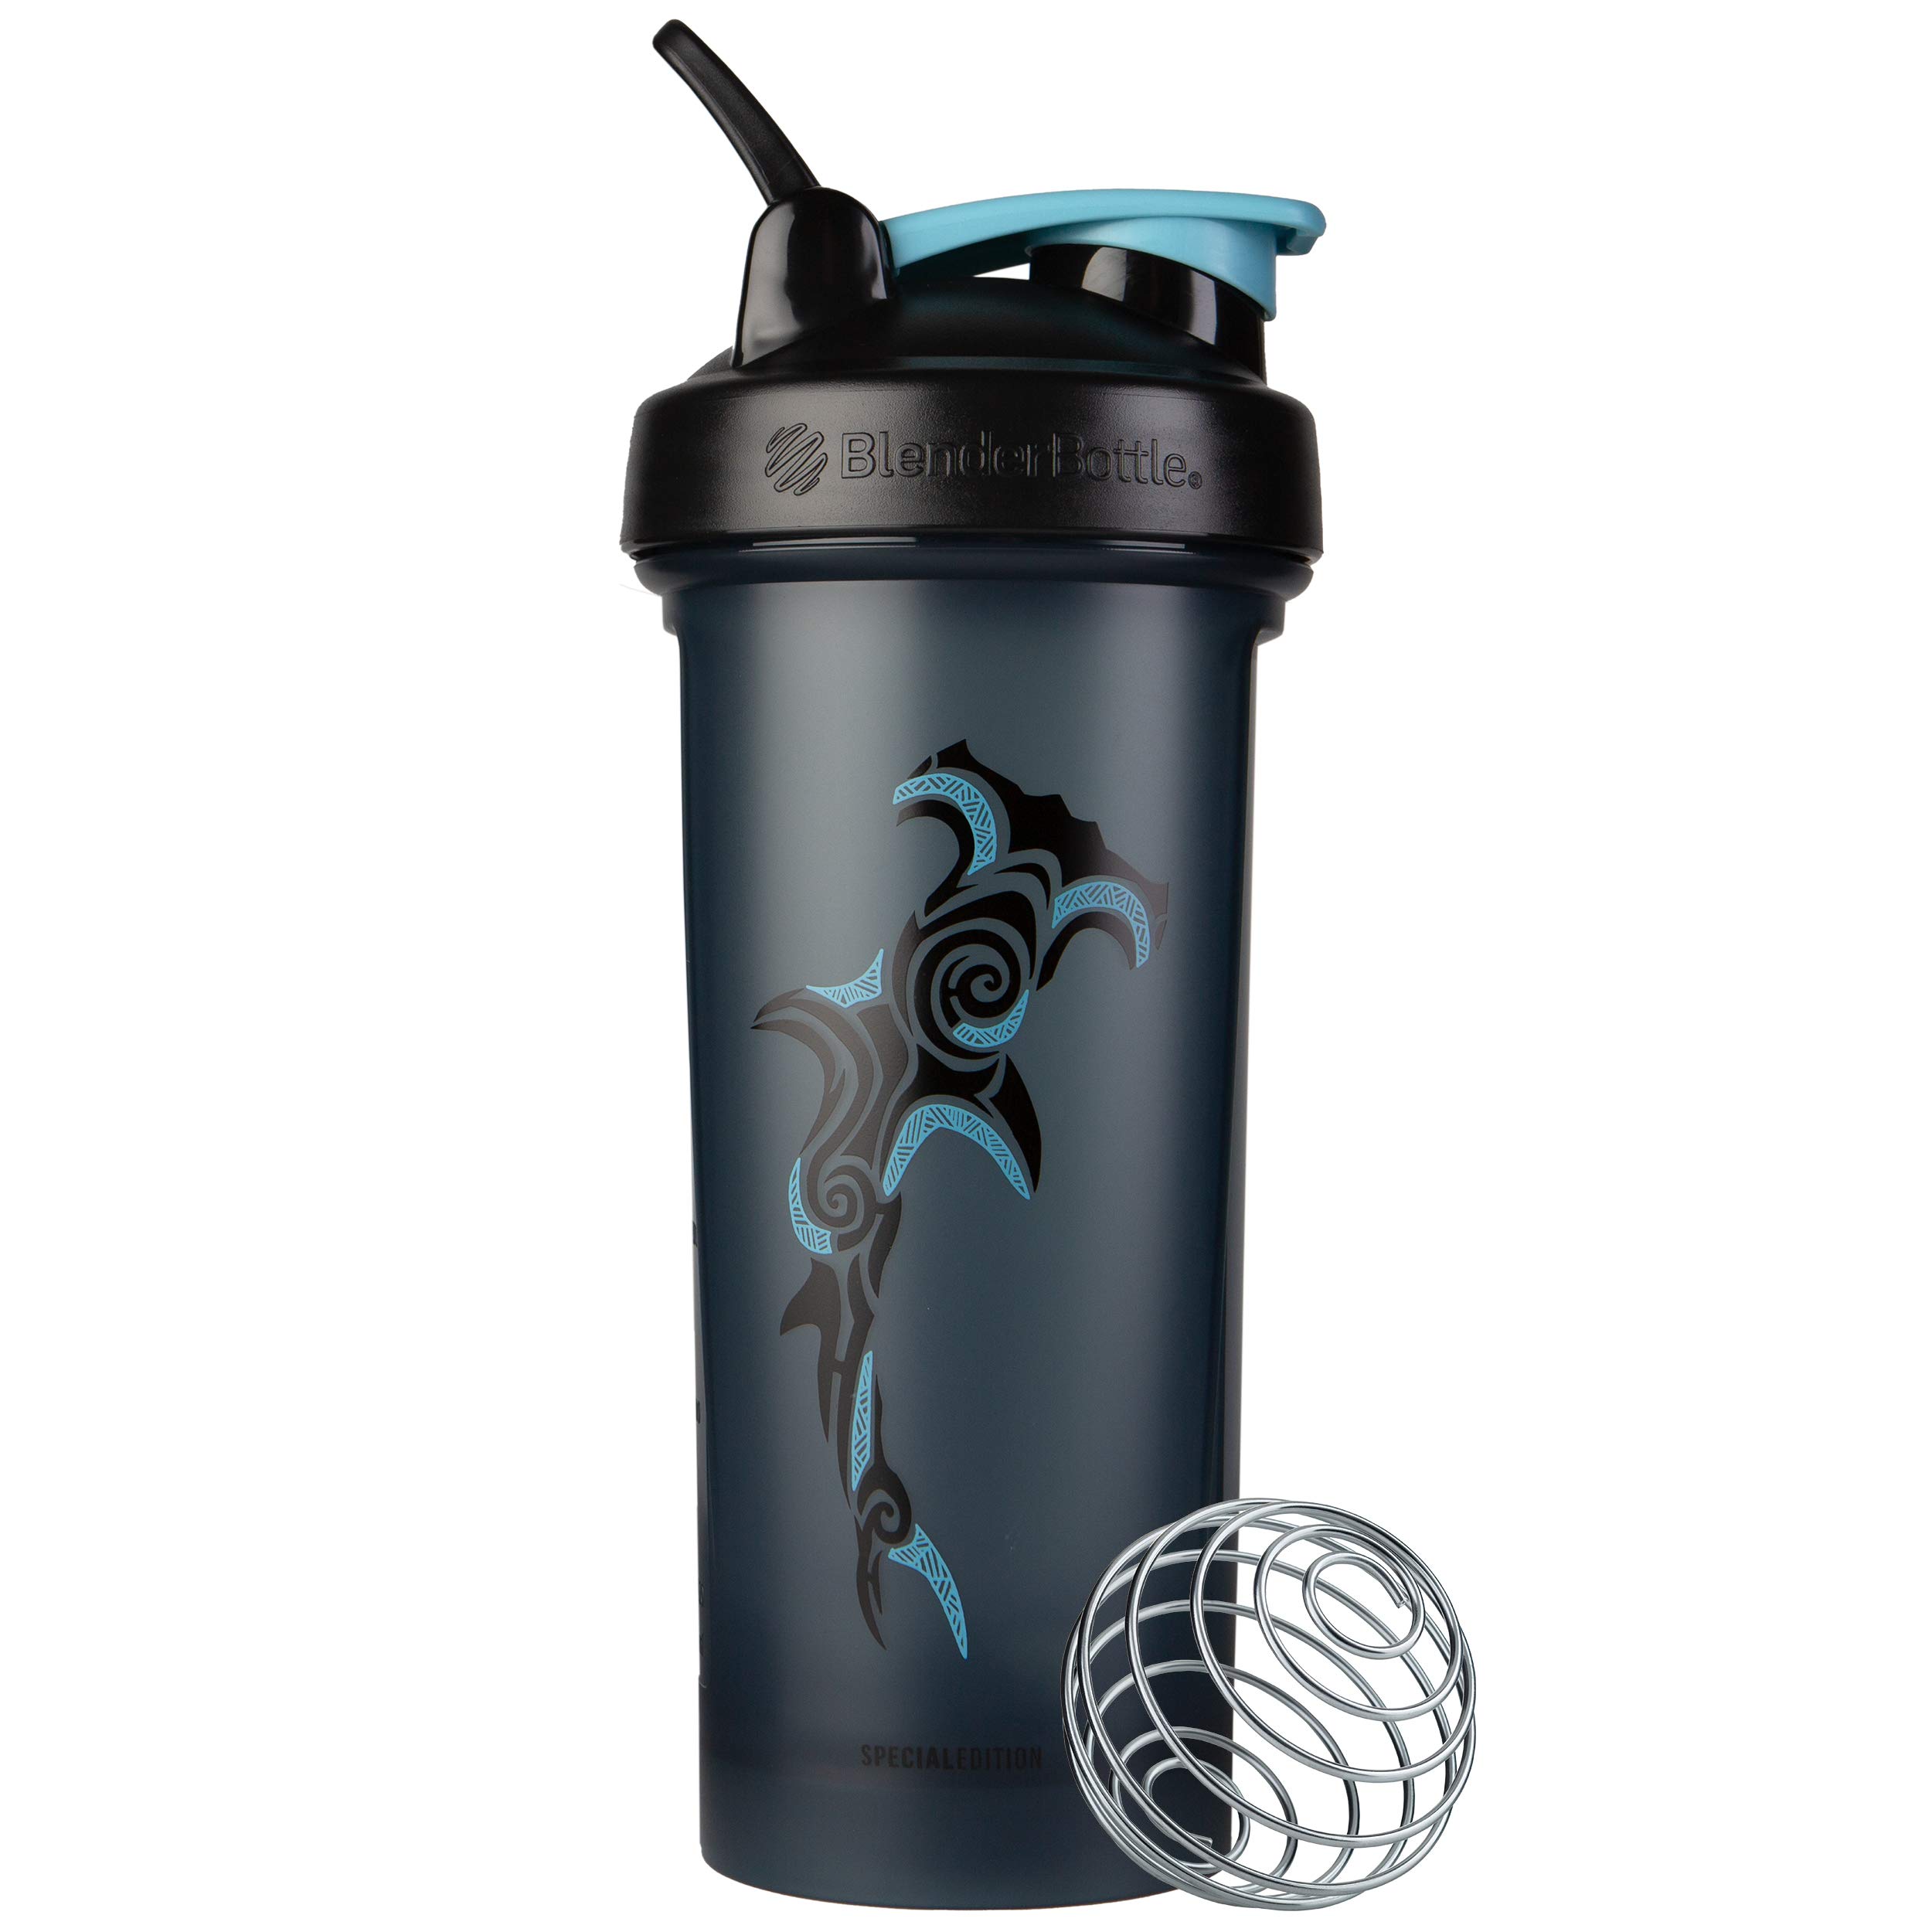 Classic 20 oz Protein Shaker Mixer Cup Bottle For Protein Shakes